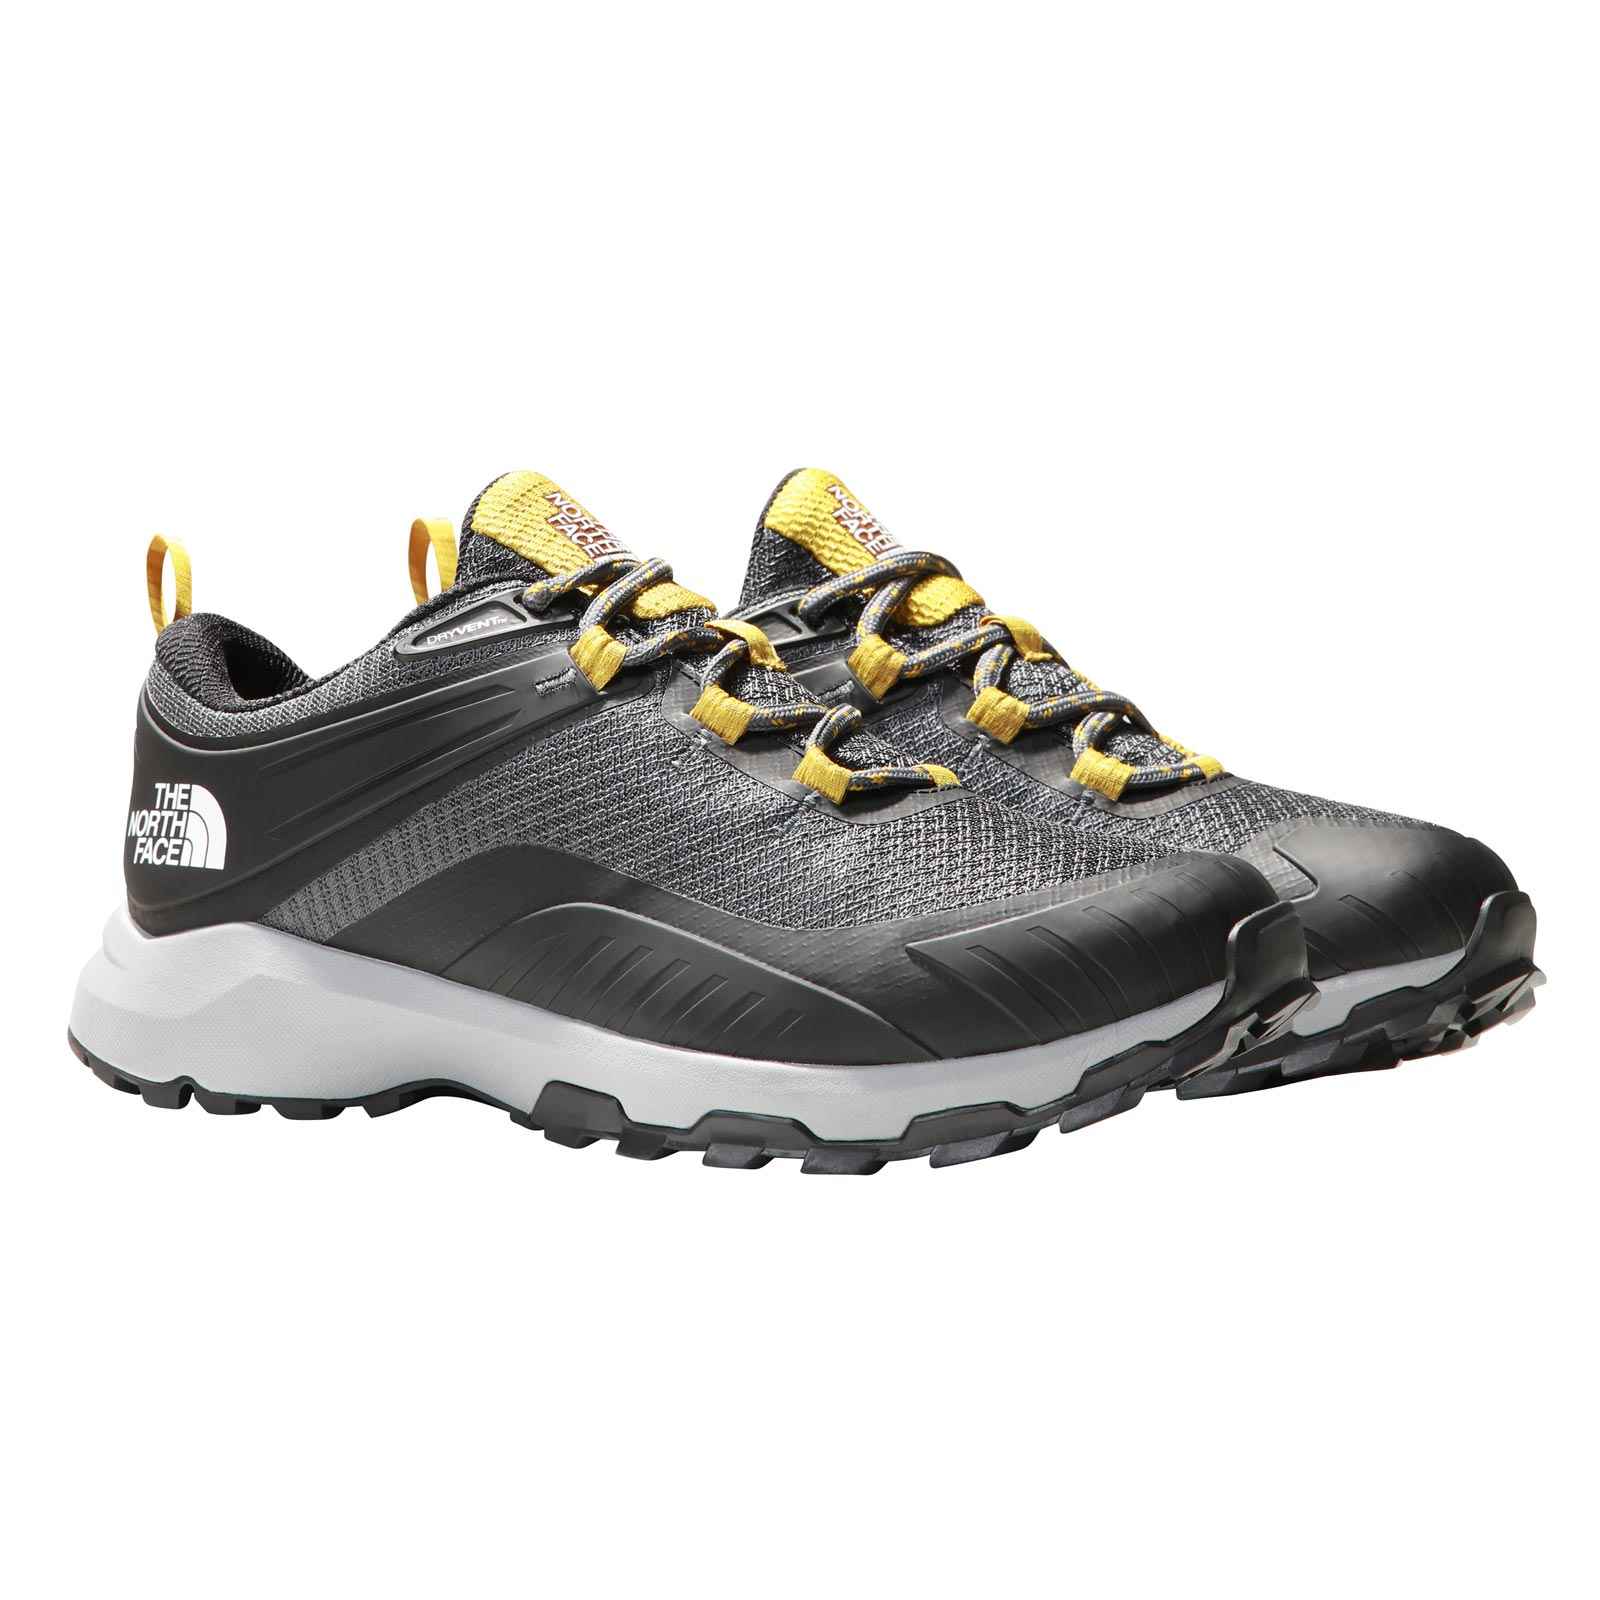 THE NORTH FACE CRAGMONT MENS WATERPROOF HIKING SHOES